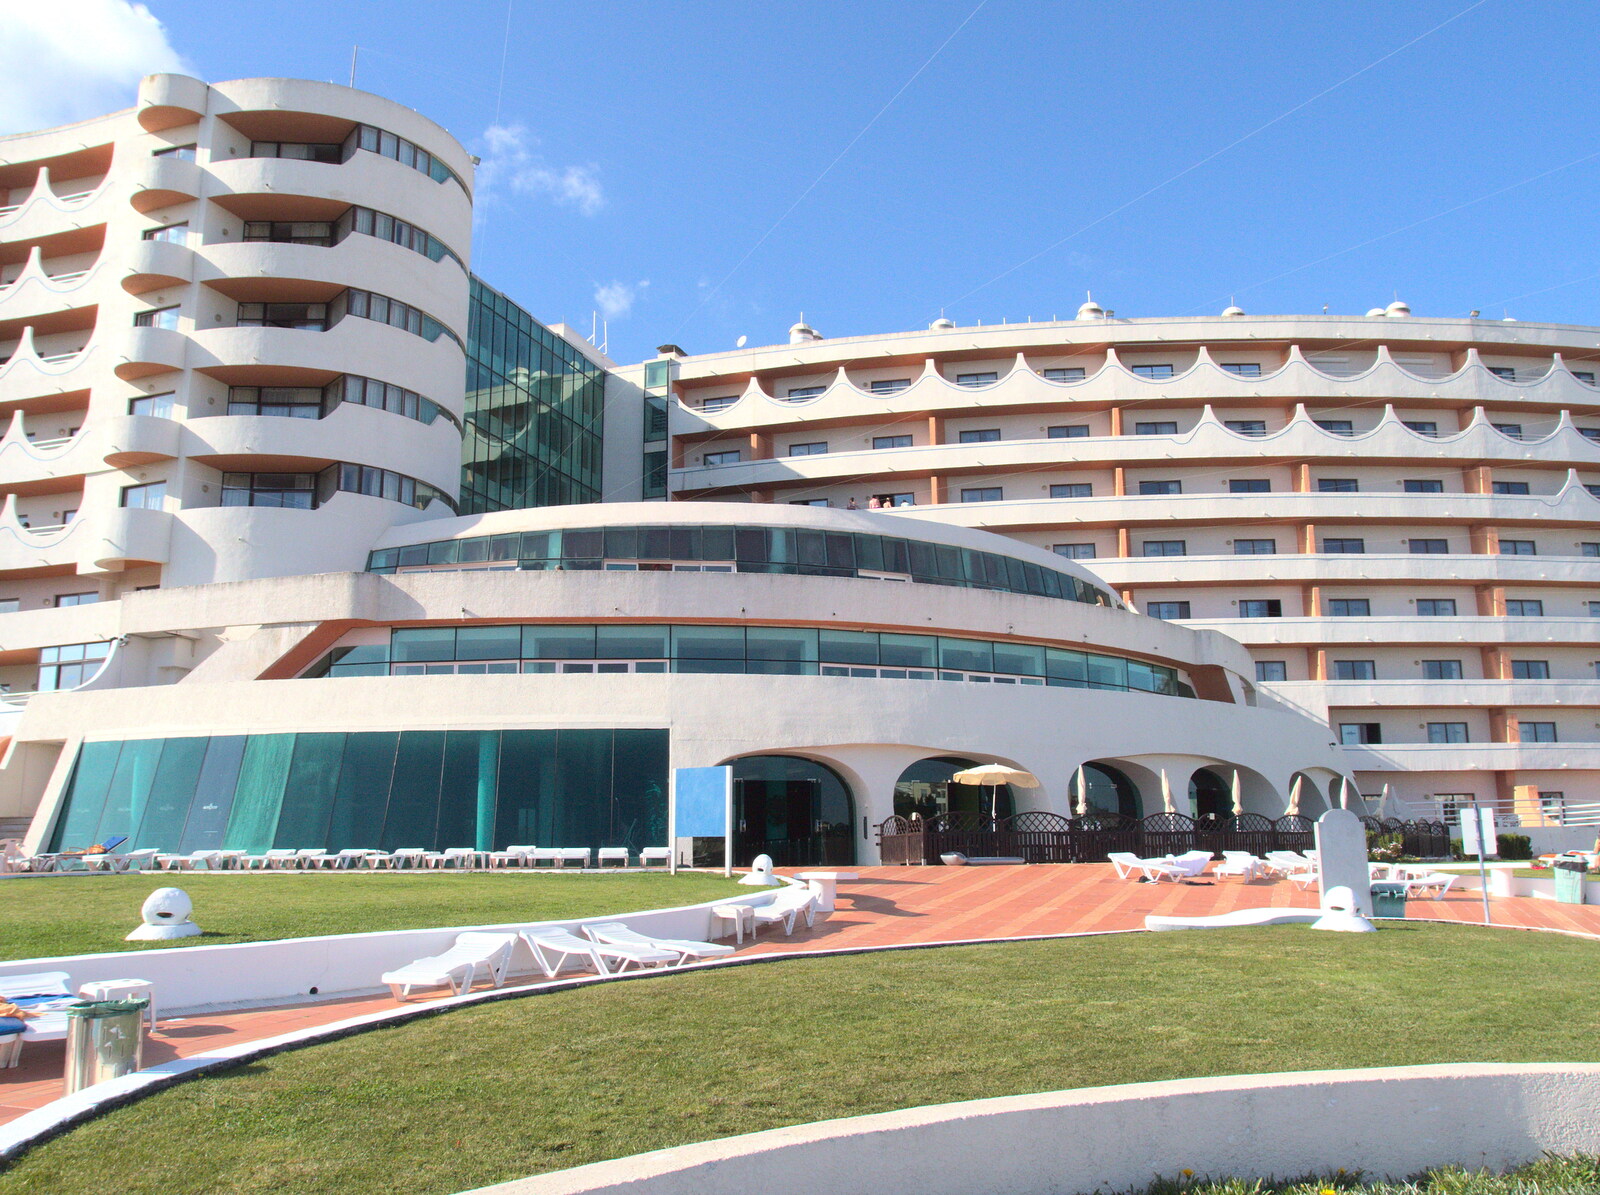 The edefice that is the Hotel Paraiso do Albufeira from A Trip to Albufeira: The Hotel Paraiso, Portugal - 3rd April 2016